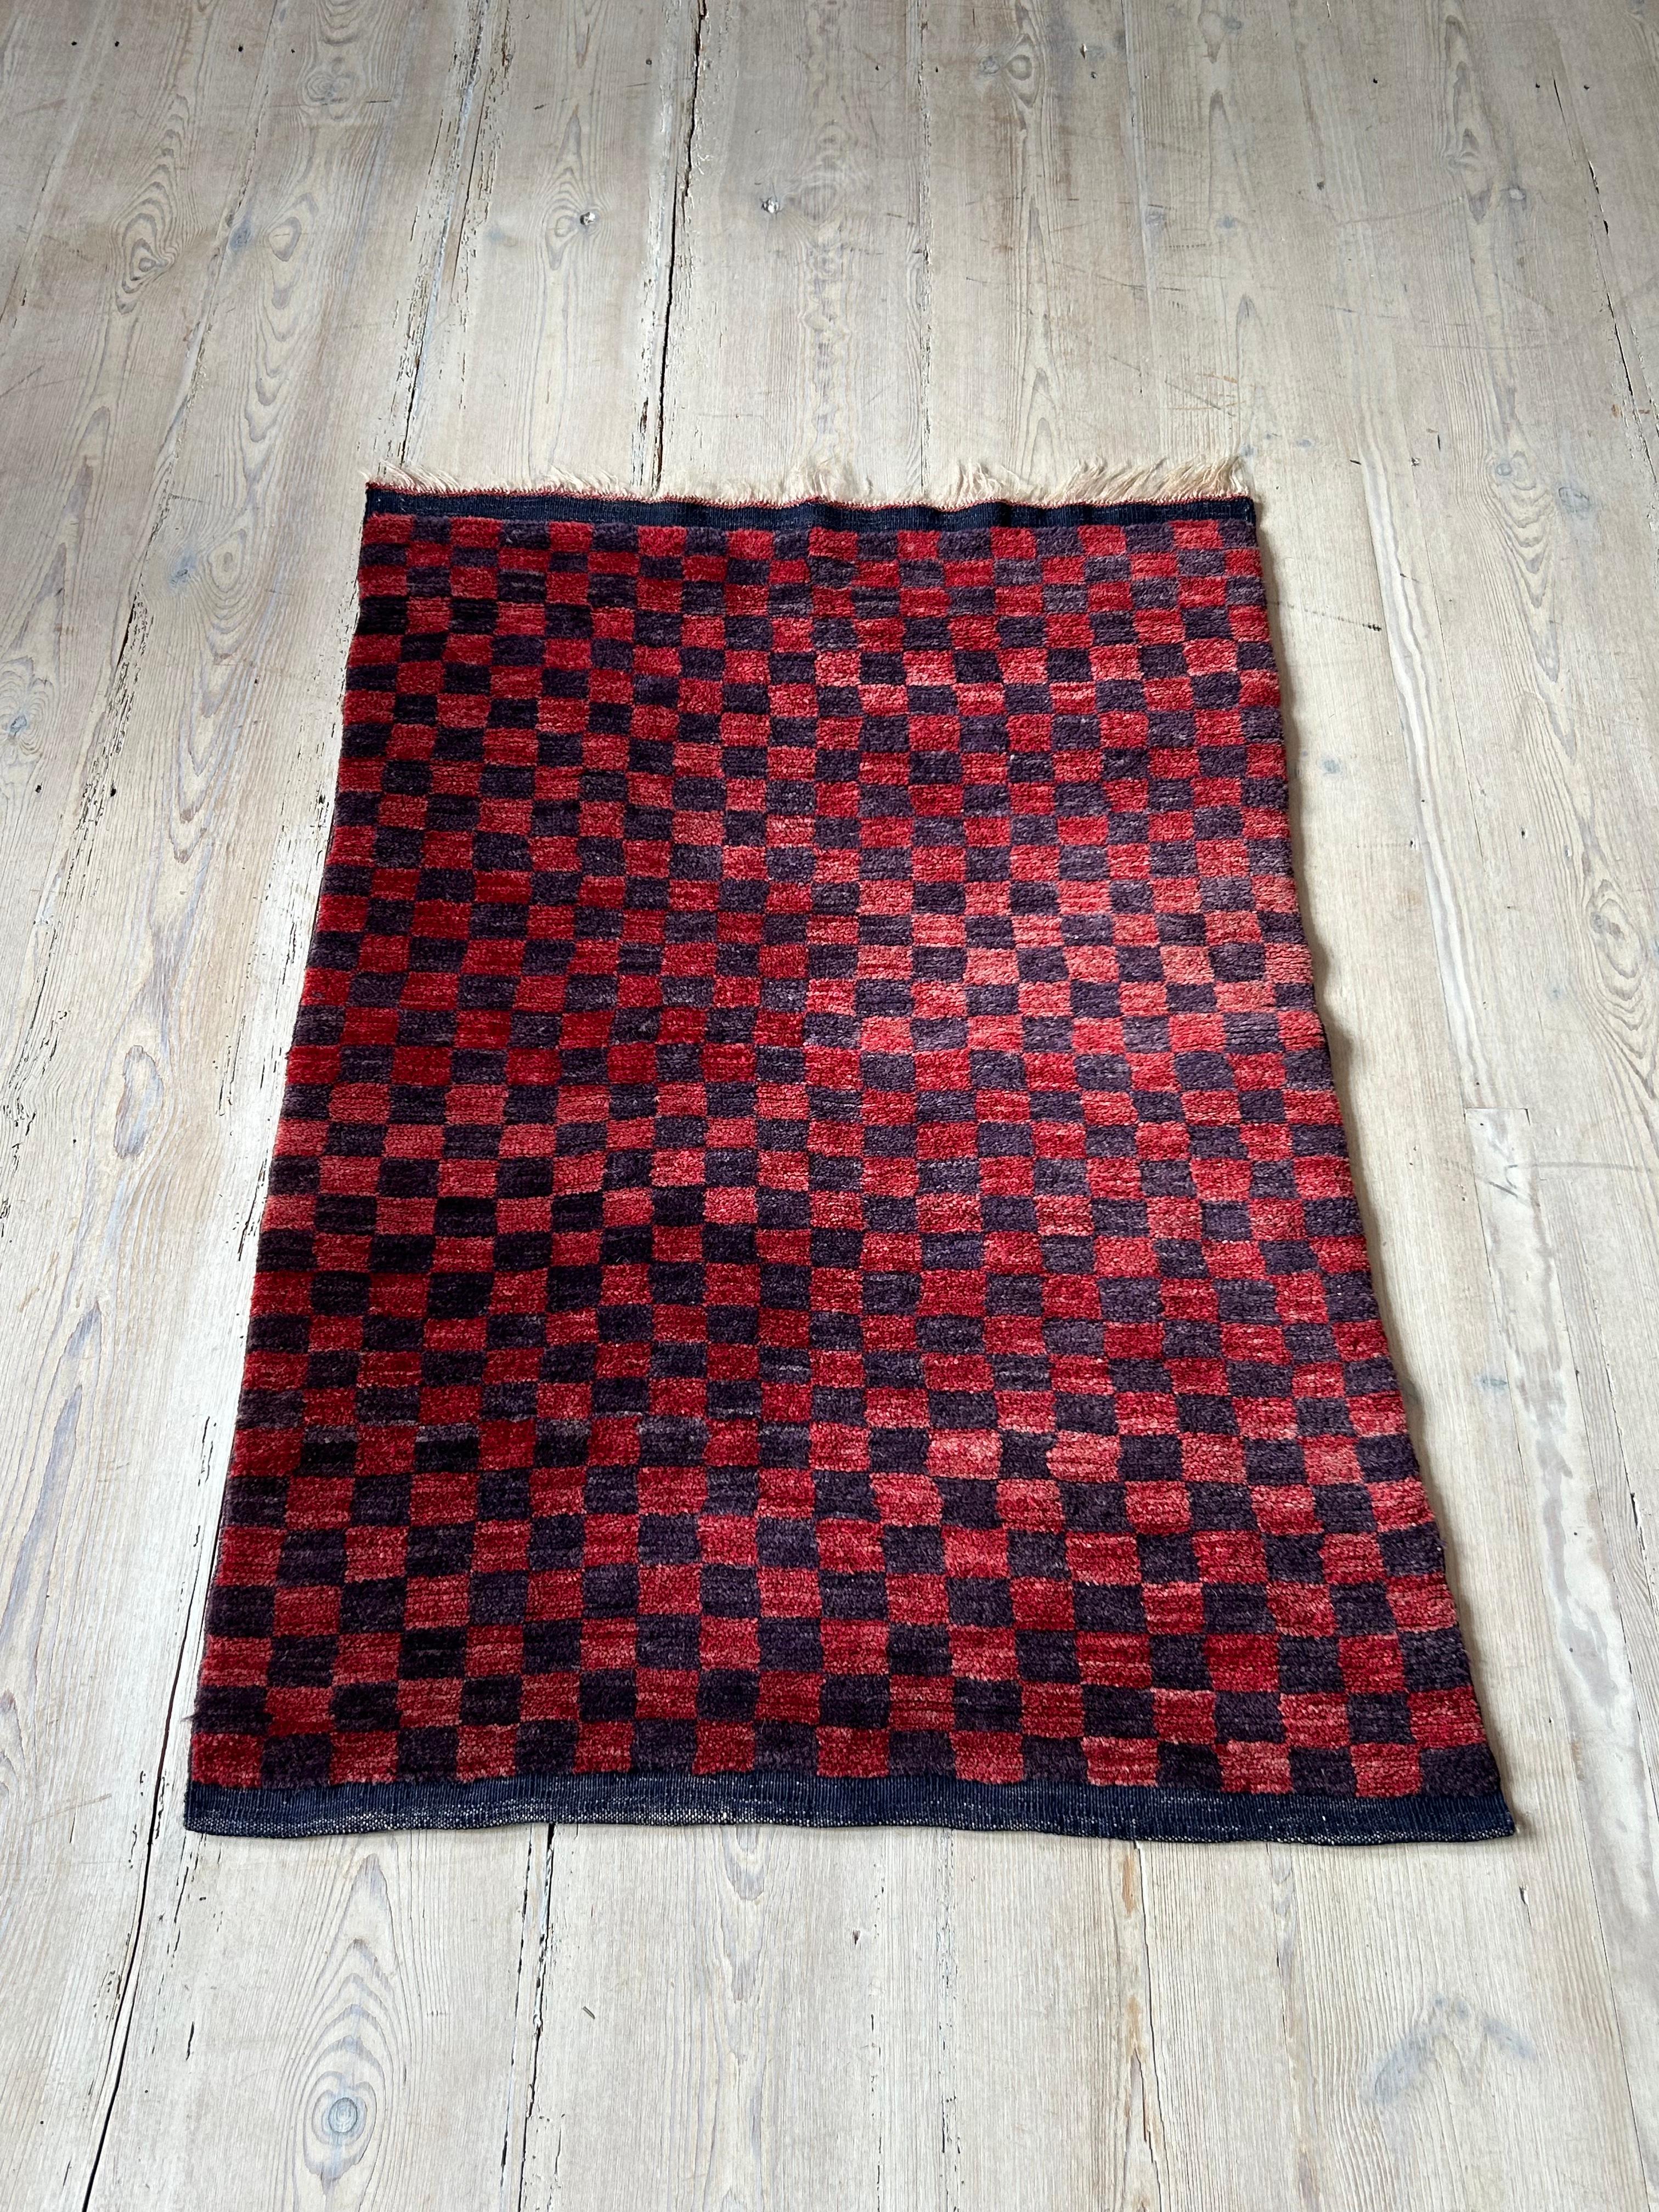 Turkish Vintage Tulu Rug with Red and Purple Check Pattern, Turkey, 20th Century For Sale